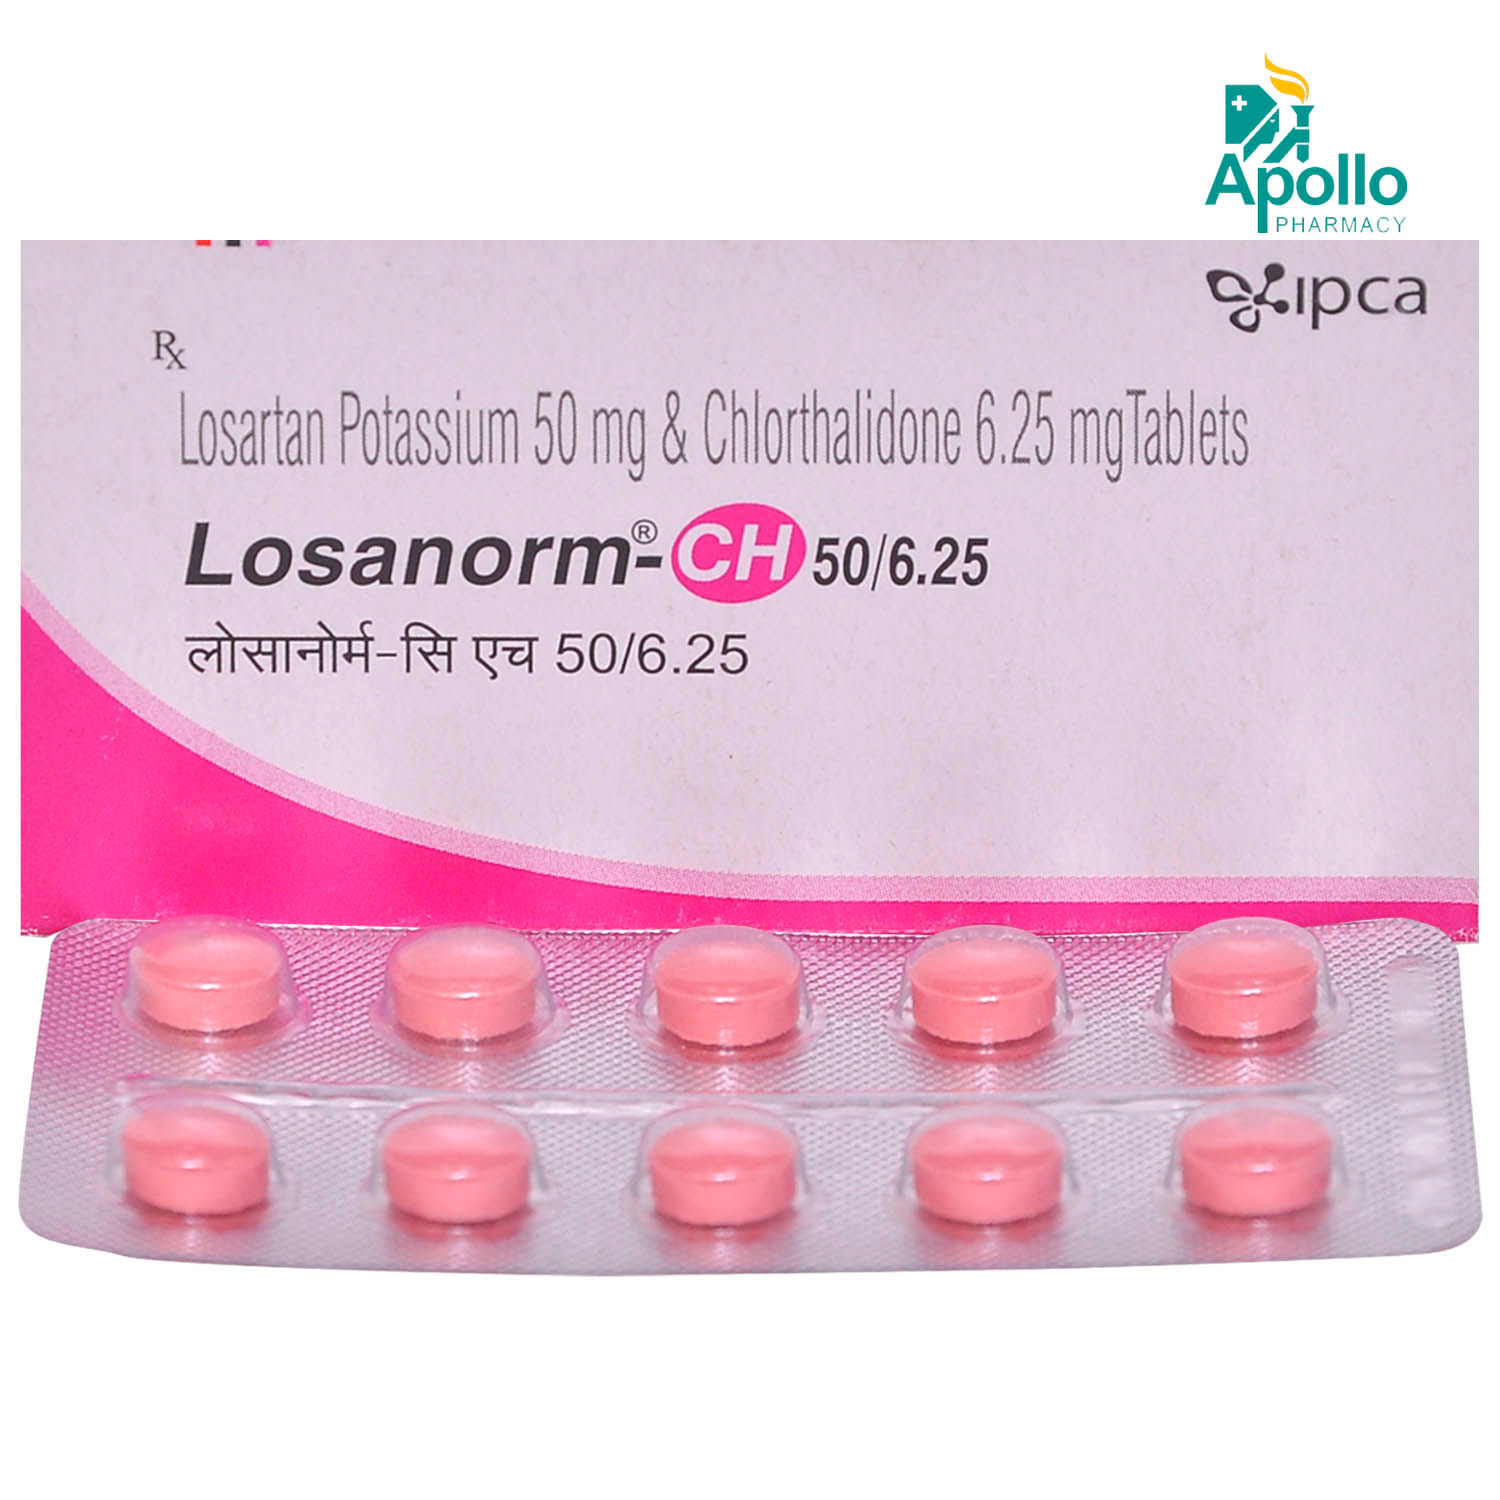 LOSANORMCH 50/6.25MG TABLET, Pack of 10 TABLETS